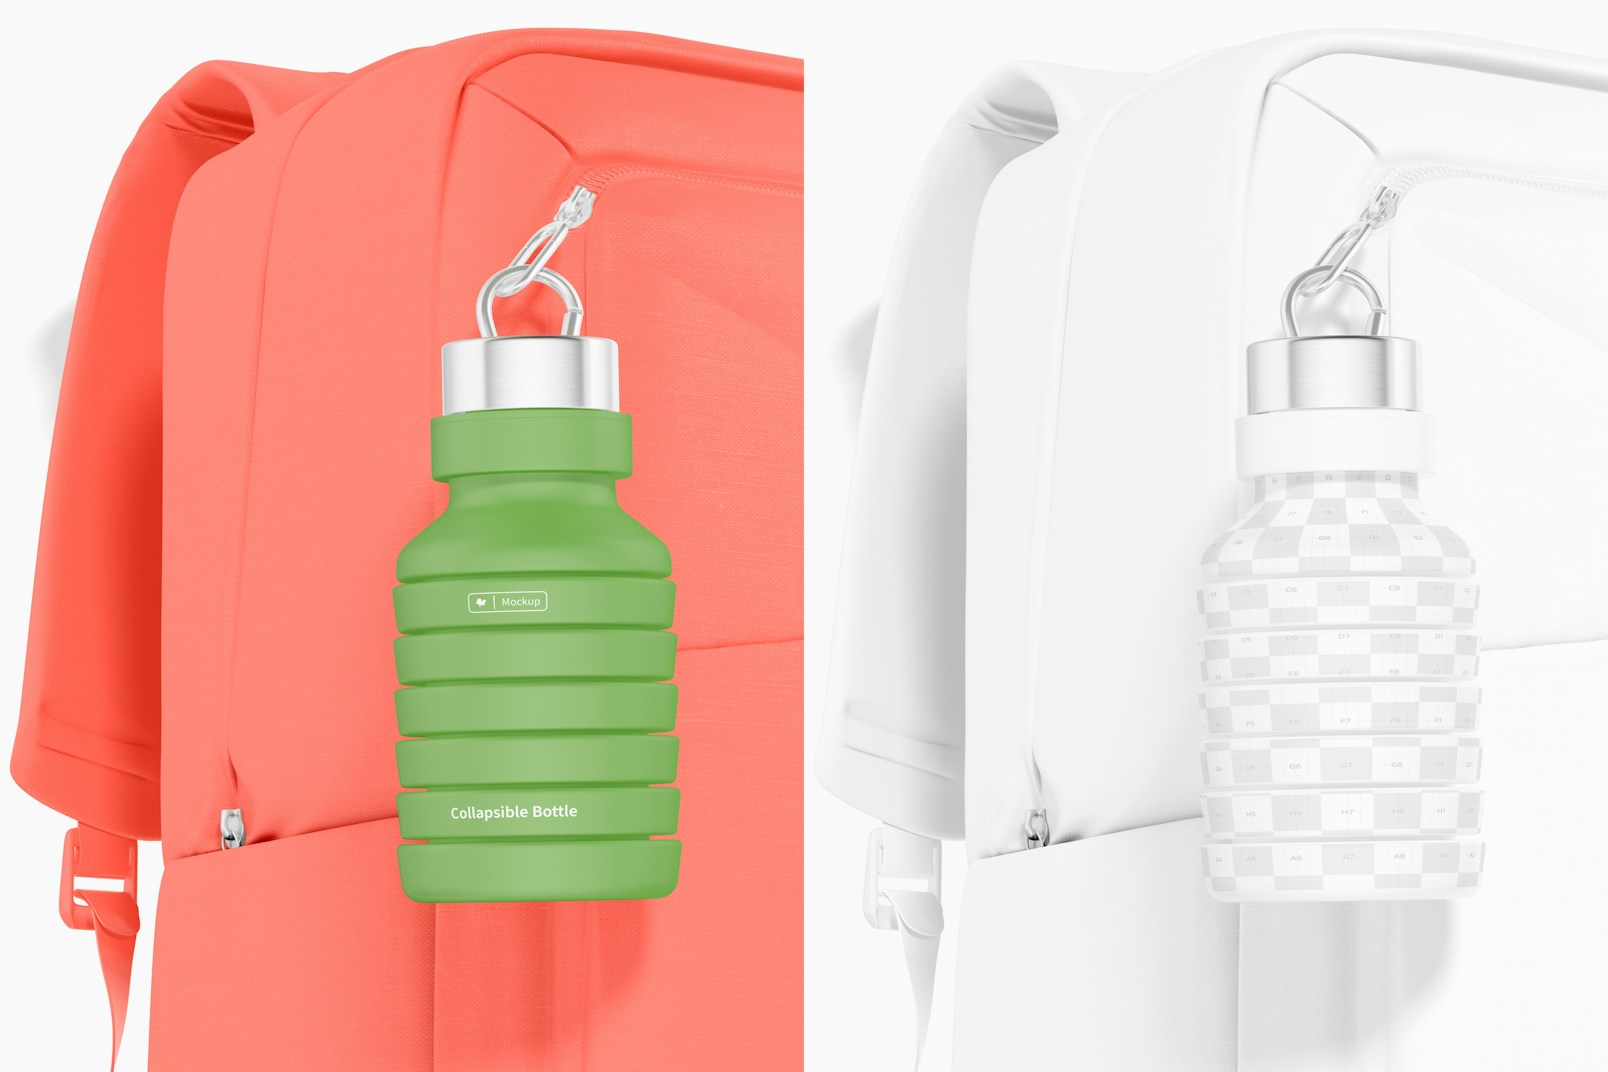 Collapsible Water Bottle Mockup, on Bag